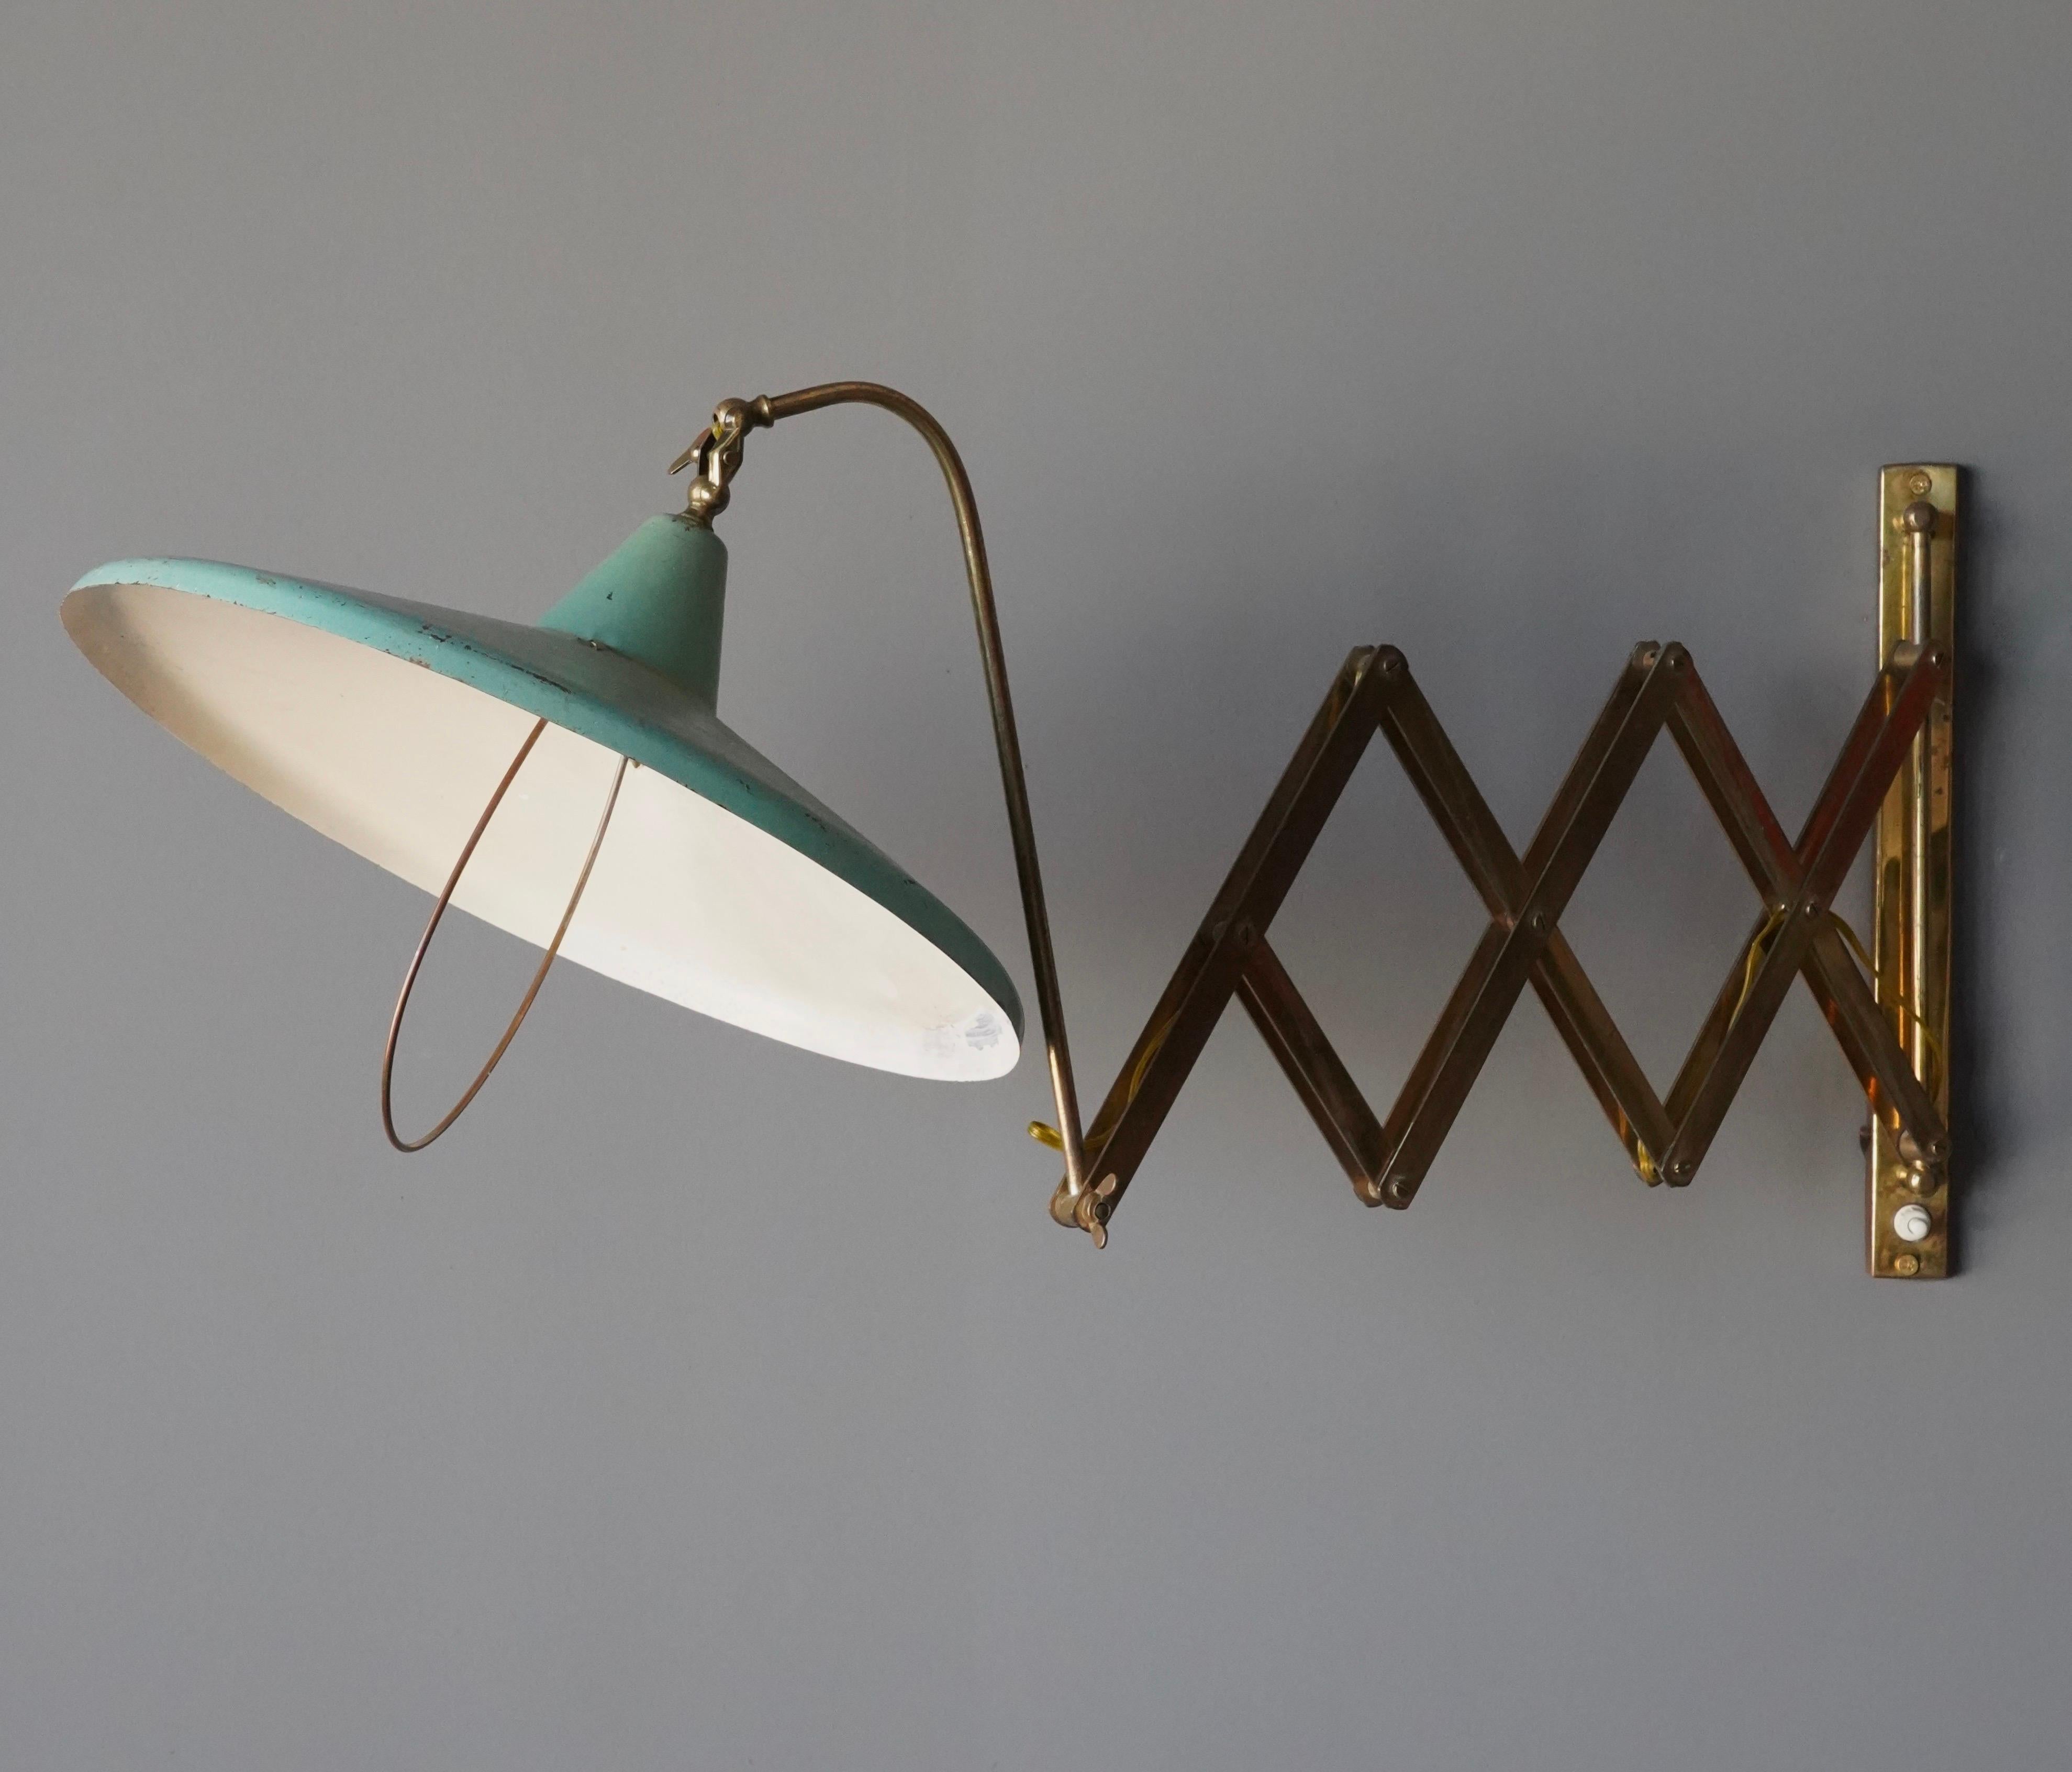 A sizable wall light / task light. Designed and produced in Italy, 1940s. Original green lacquered metal shade.

Measures: 33